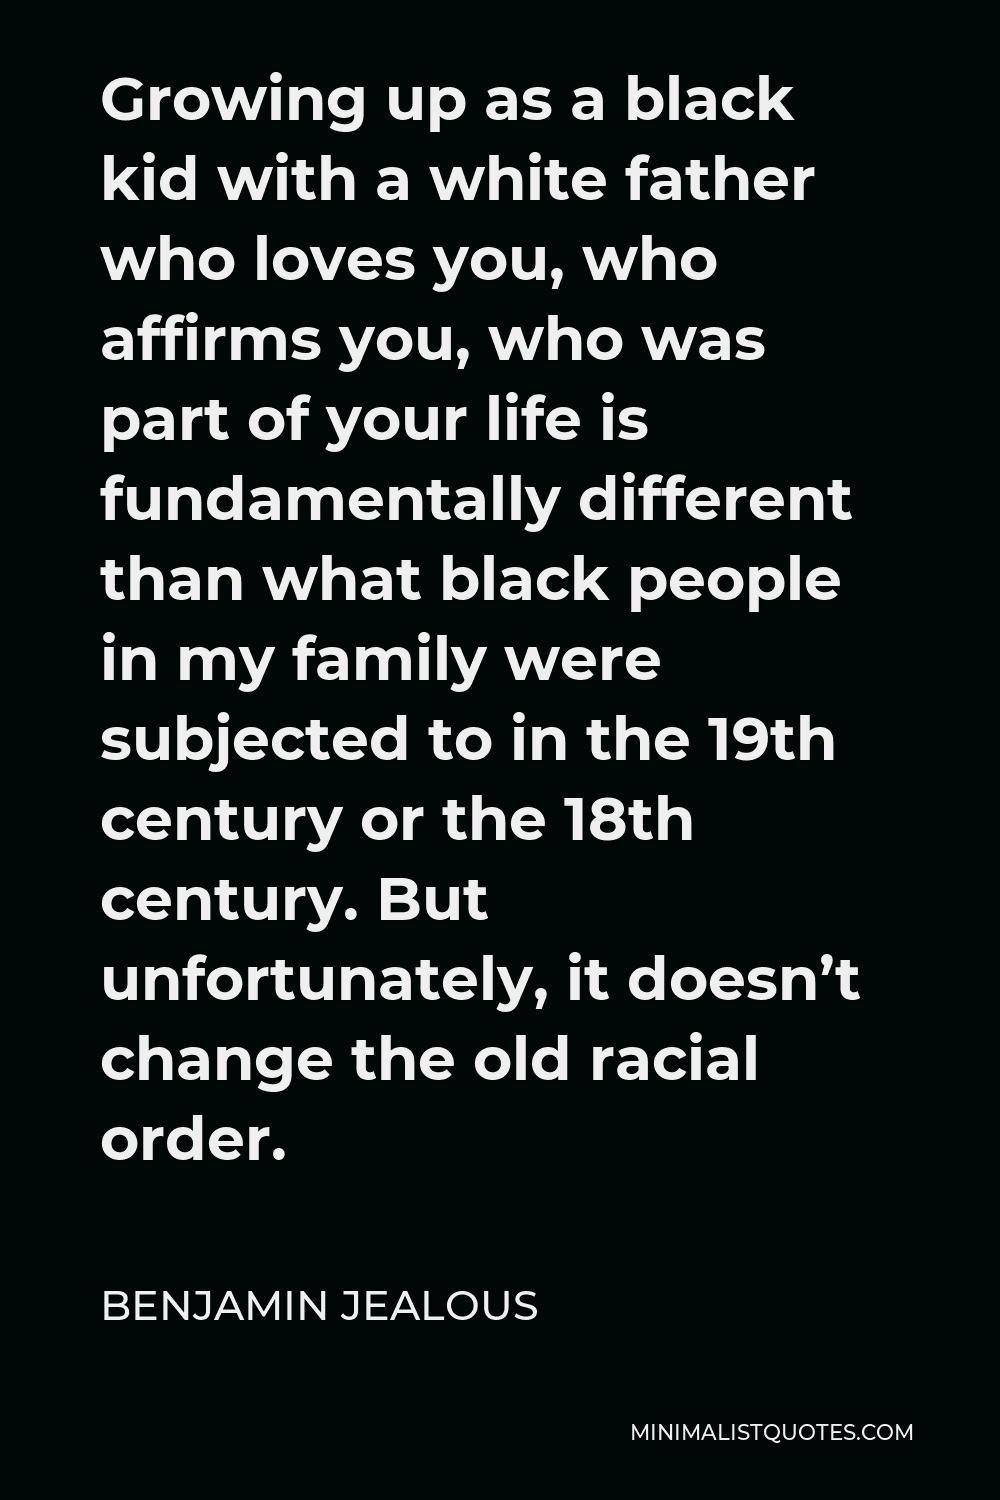 Benjamin Jealous Quote - Growing up as a black kid with a white father who loves you, who affirms you, who was part of your life is fundamentally different than what black people in my family were subjected to in the 19th century or the 18th century. But unfortunately, it doesn’t change the old racial order.